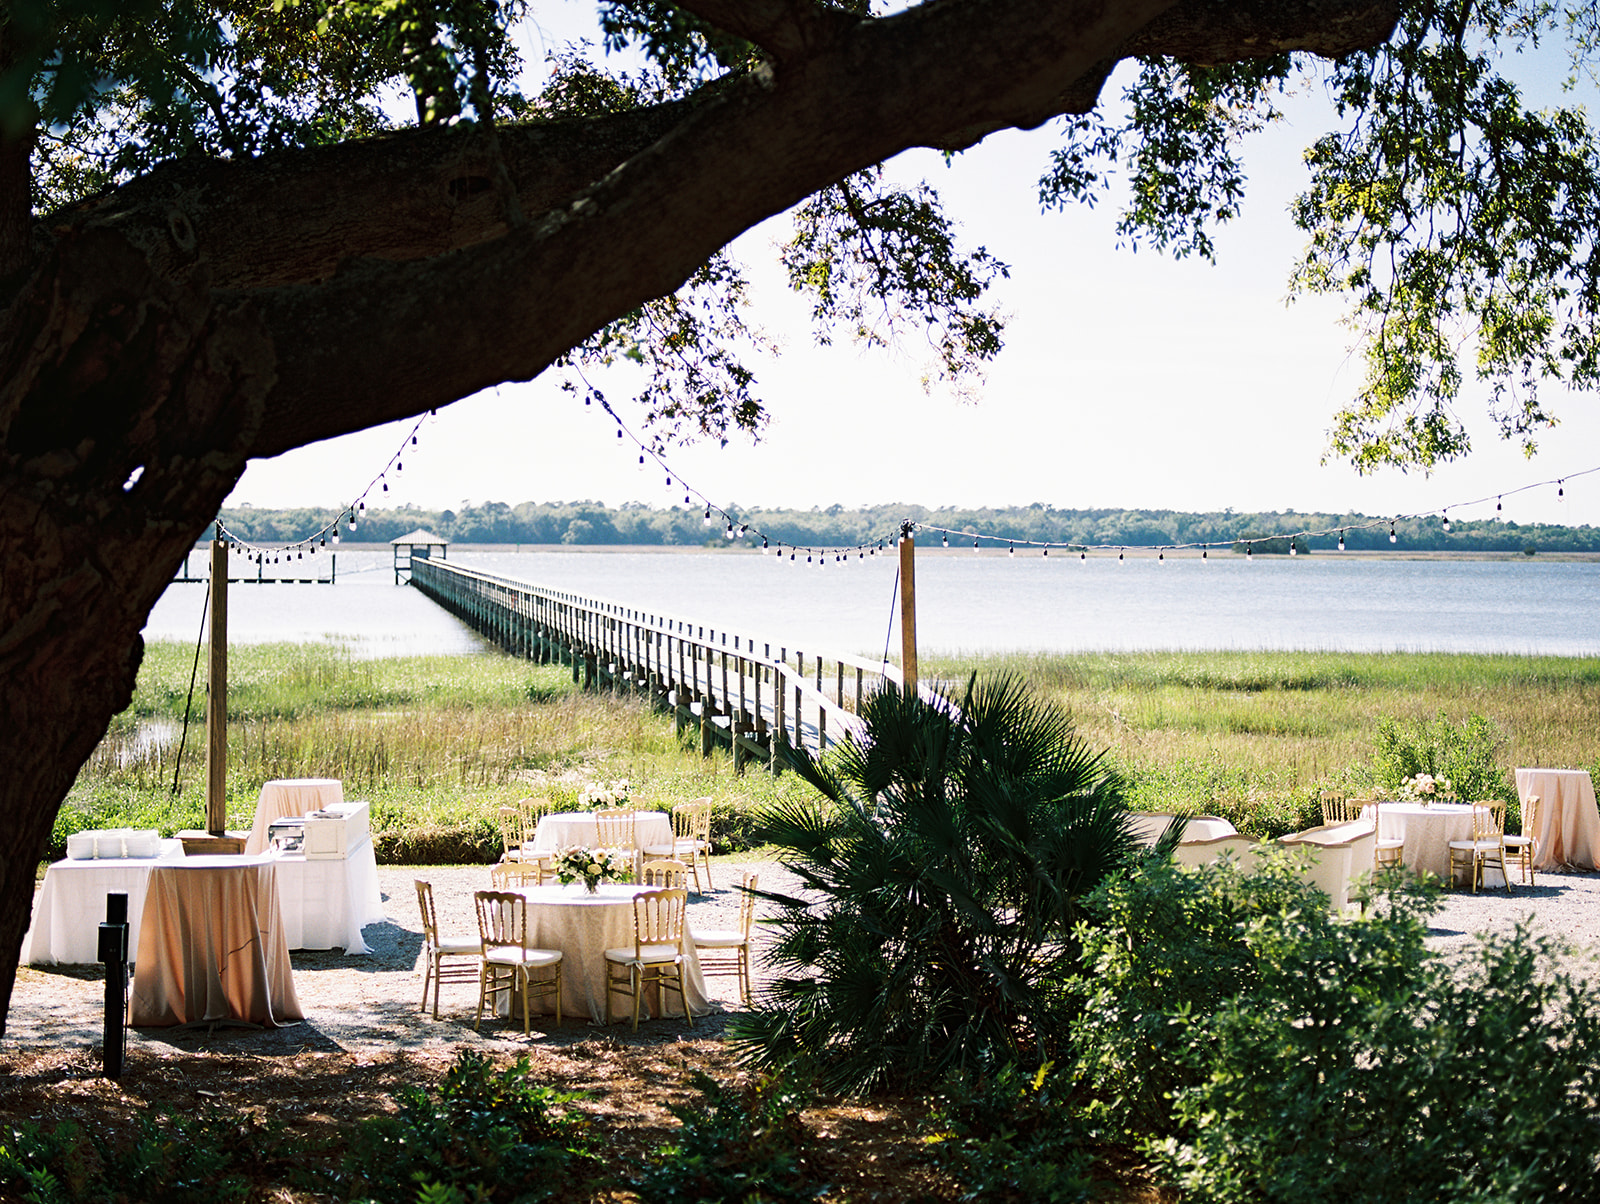 wedding reception at lowndes grove in charleston